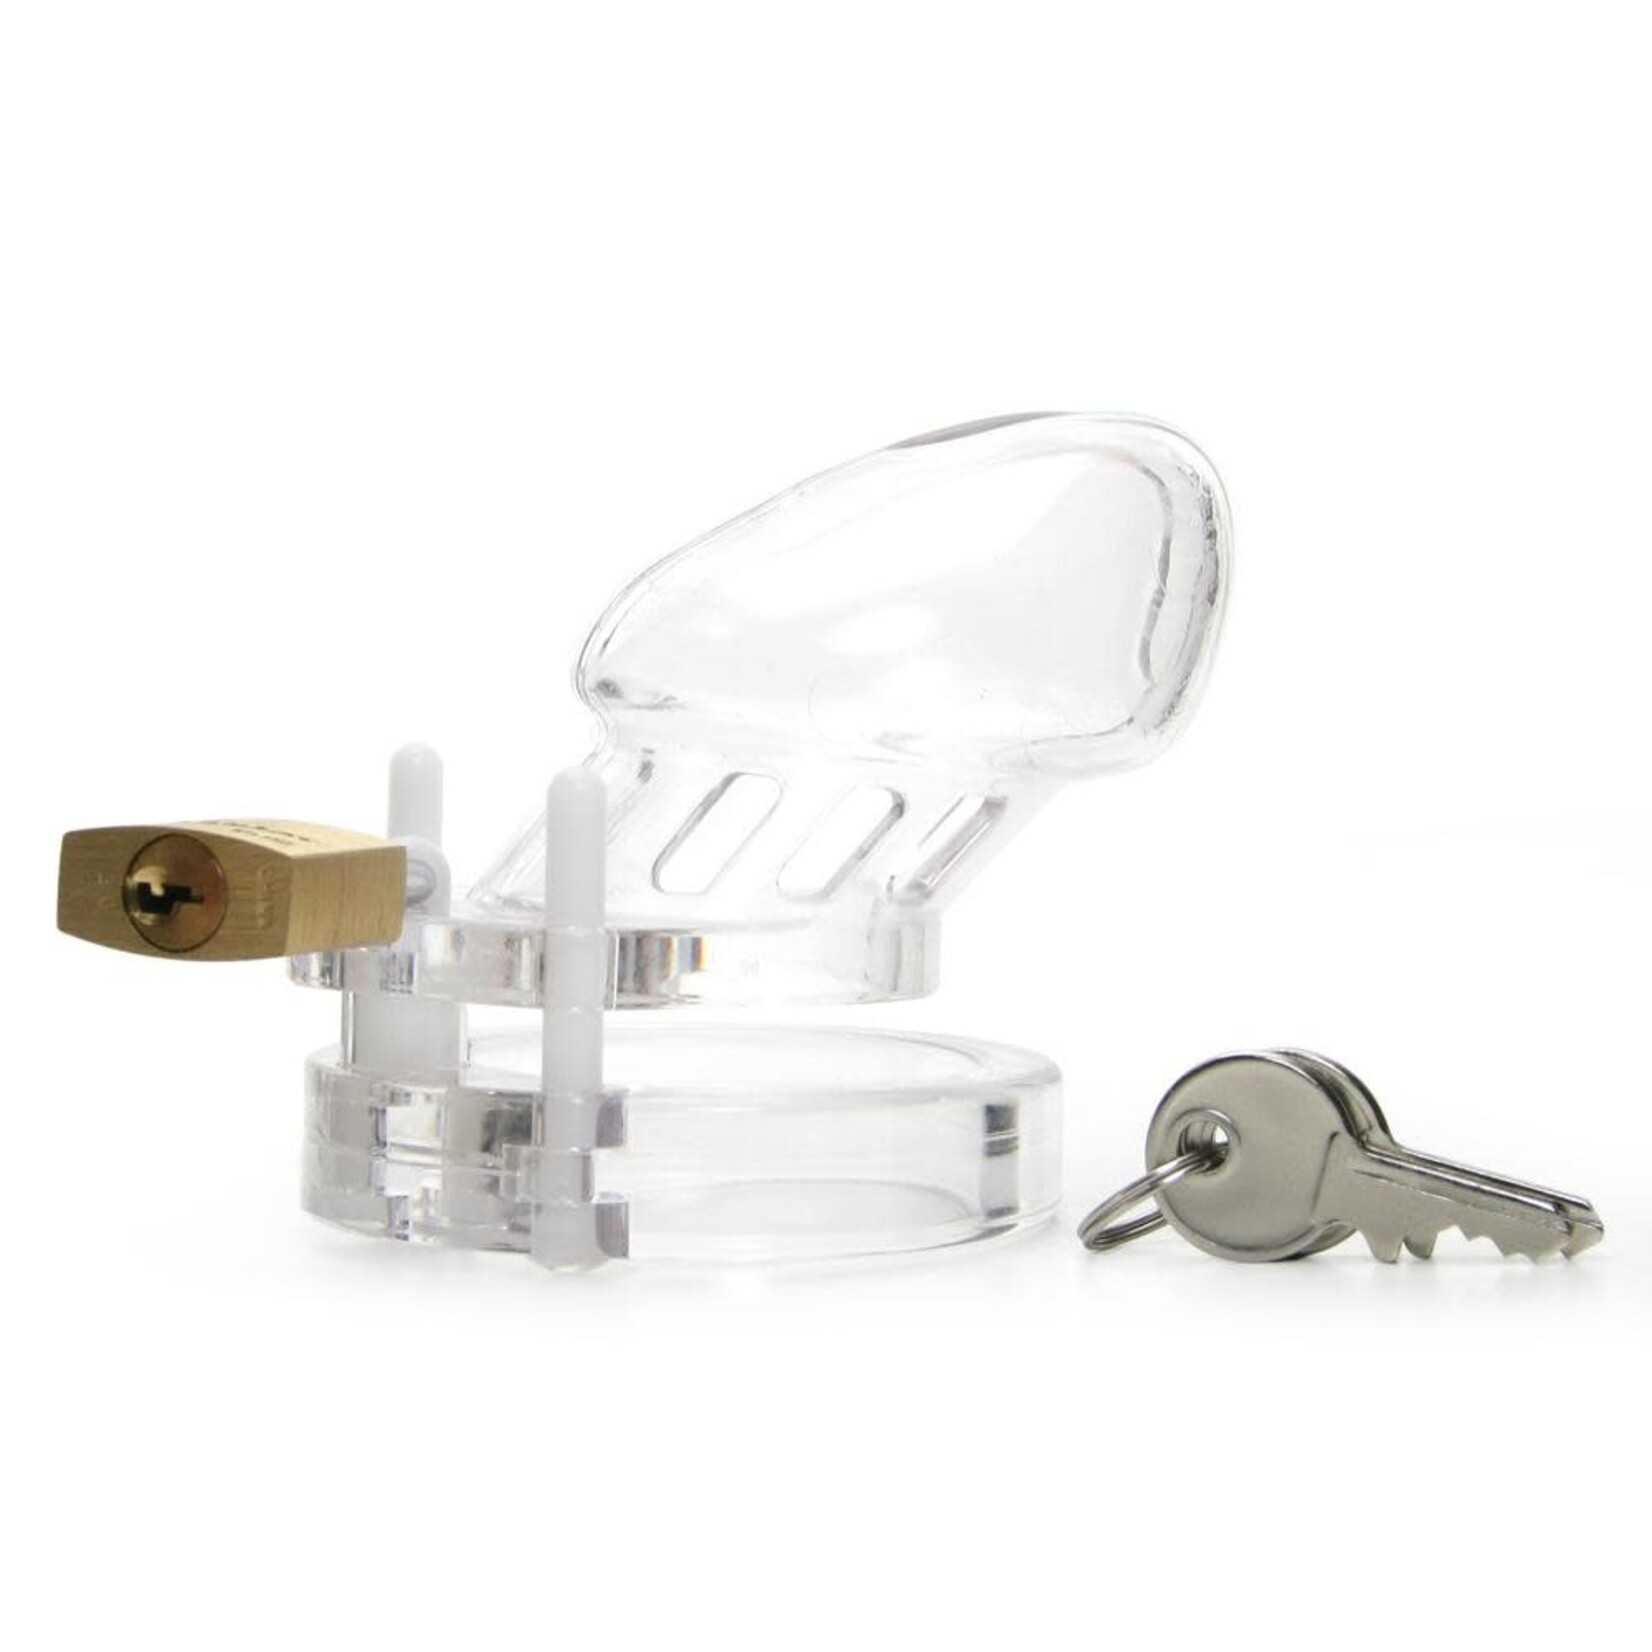 CB-X CB-6000 - 2 1/5" MALE CHASITY DEVICE - CLEAR